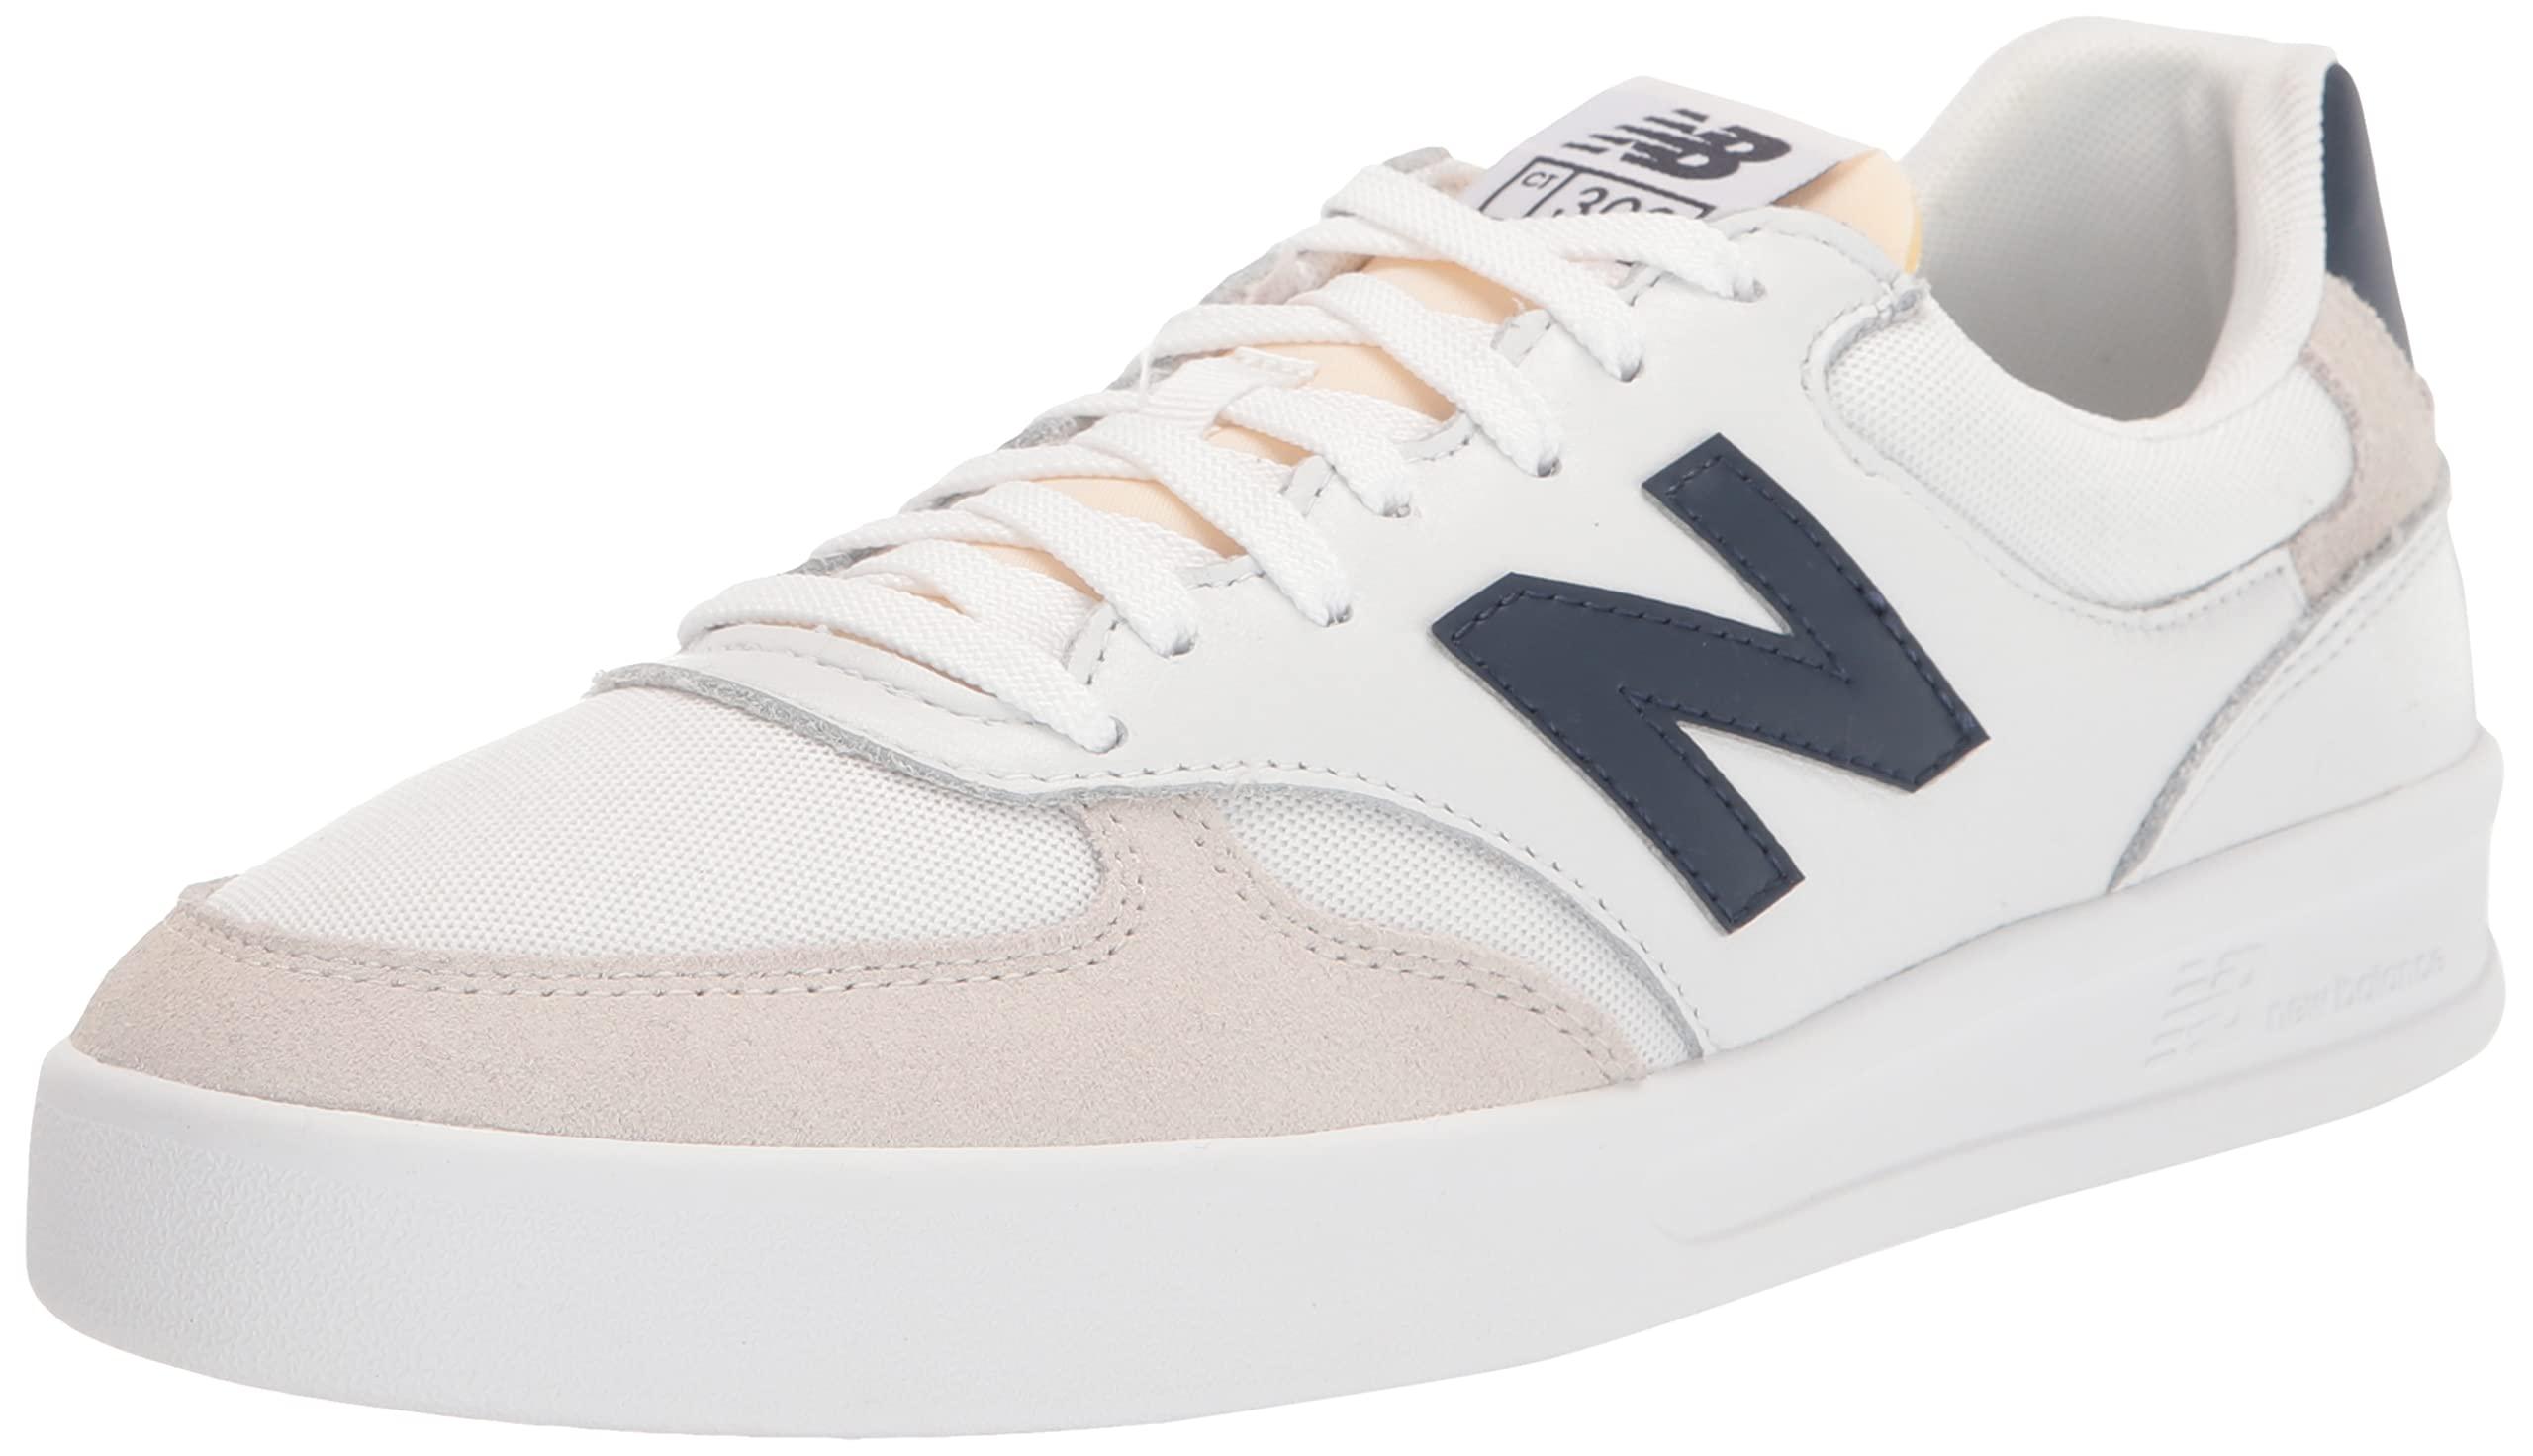 CT300 WG3 White Navy Low Top Sneaker Shoes 10.5 New Balance pour homme |  Lyst